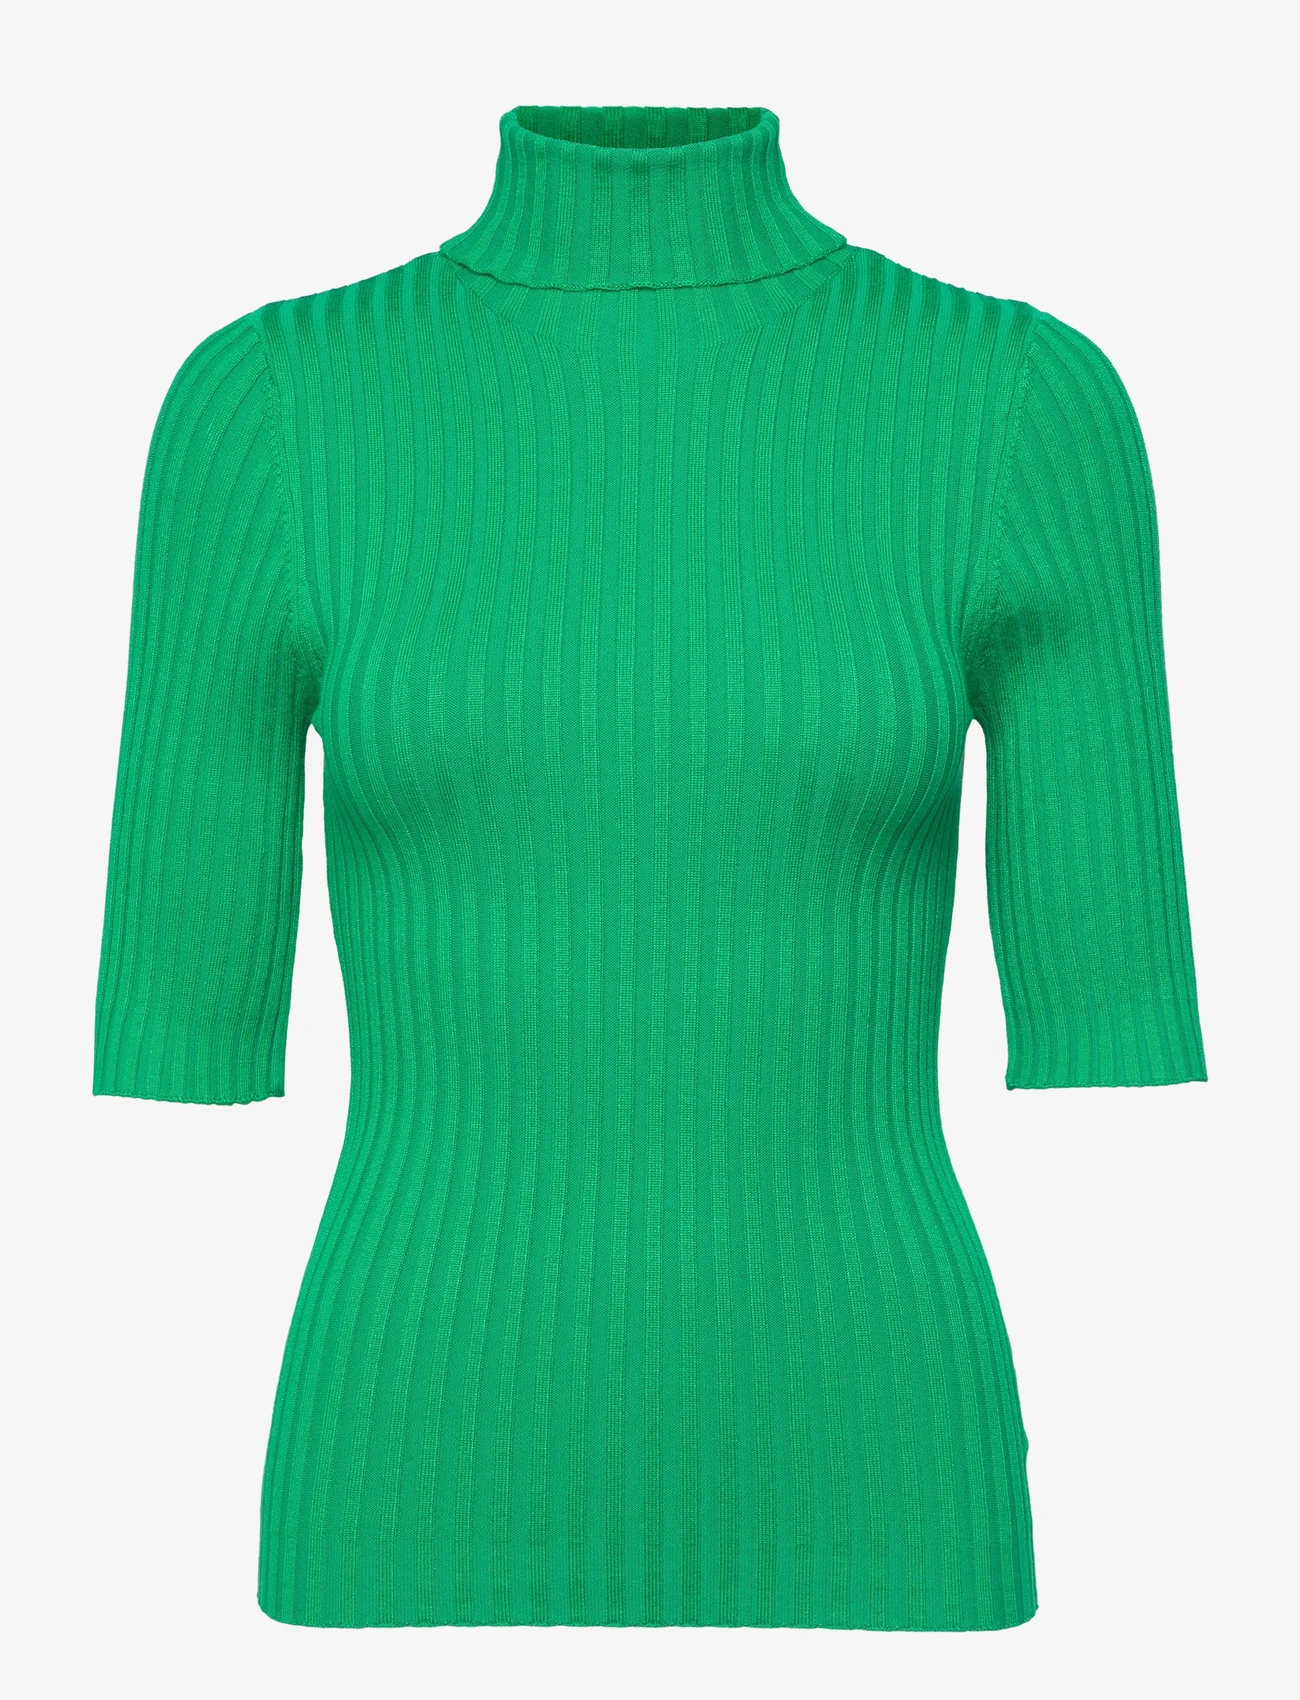 NORR - Franco knit tee - gensere - green - 0